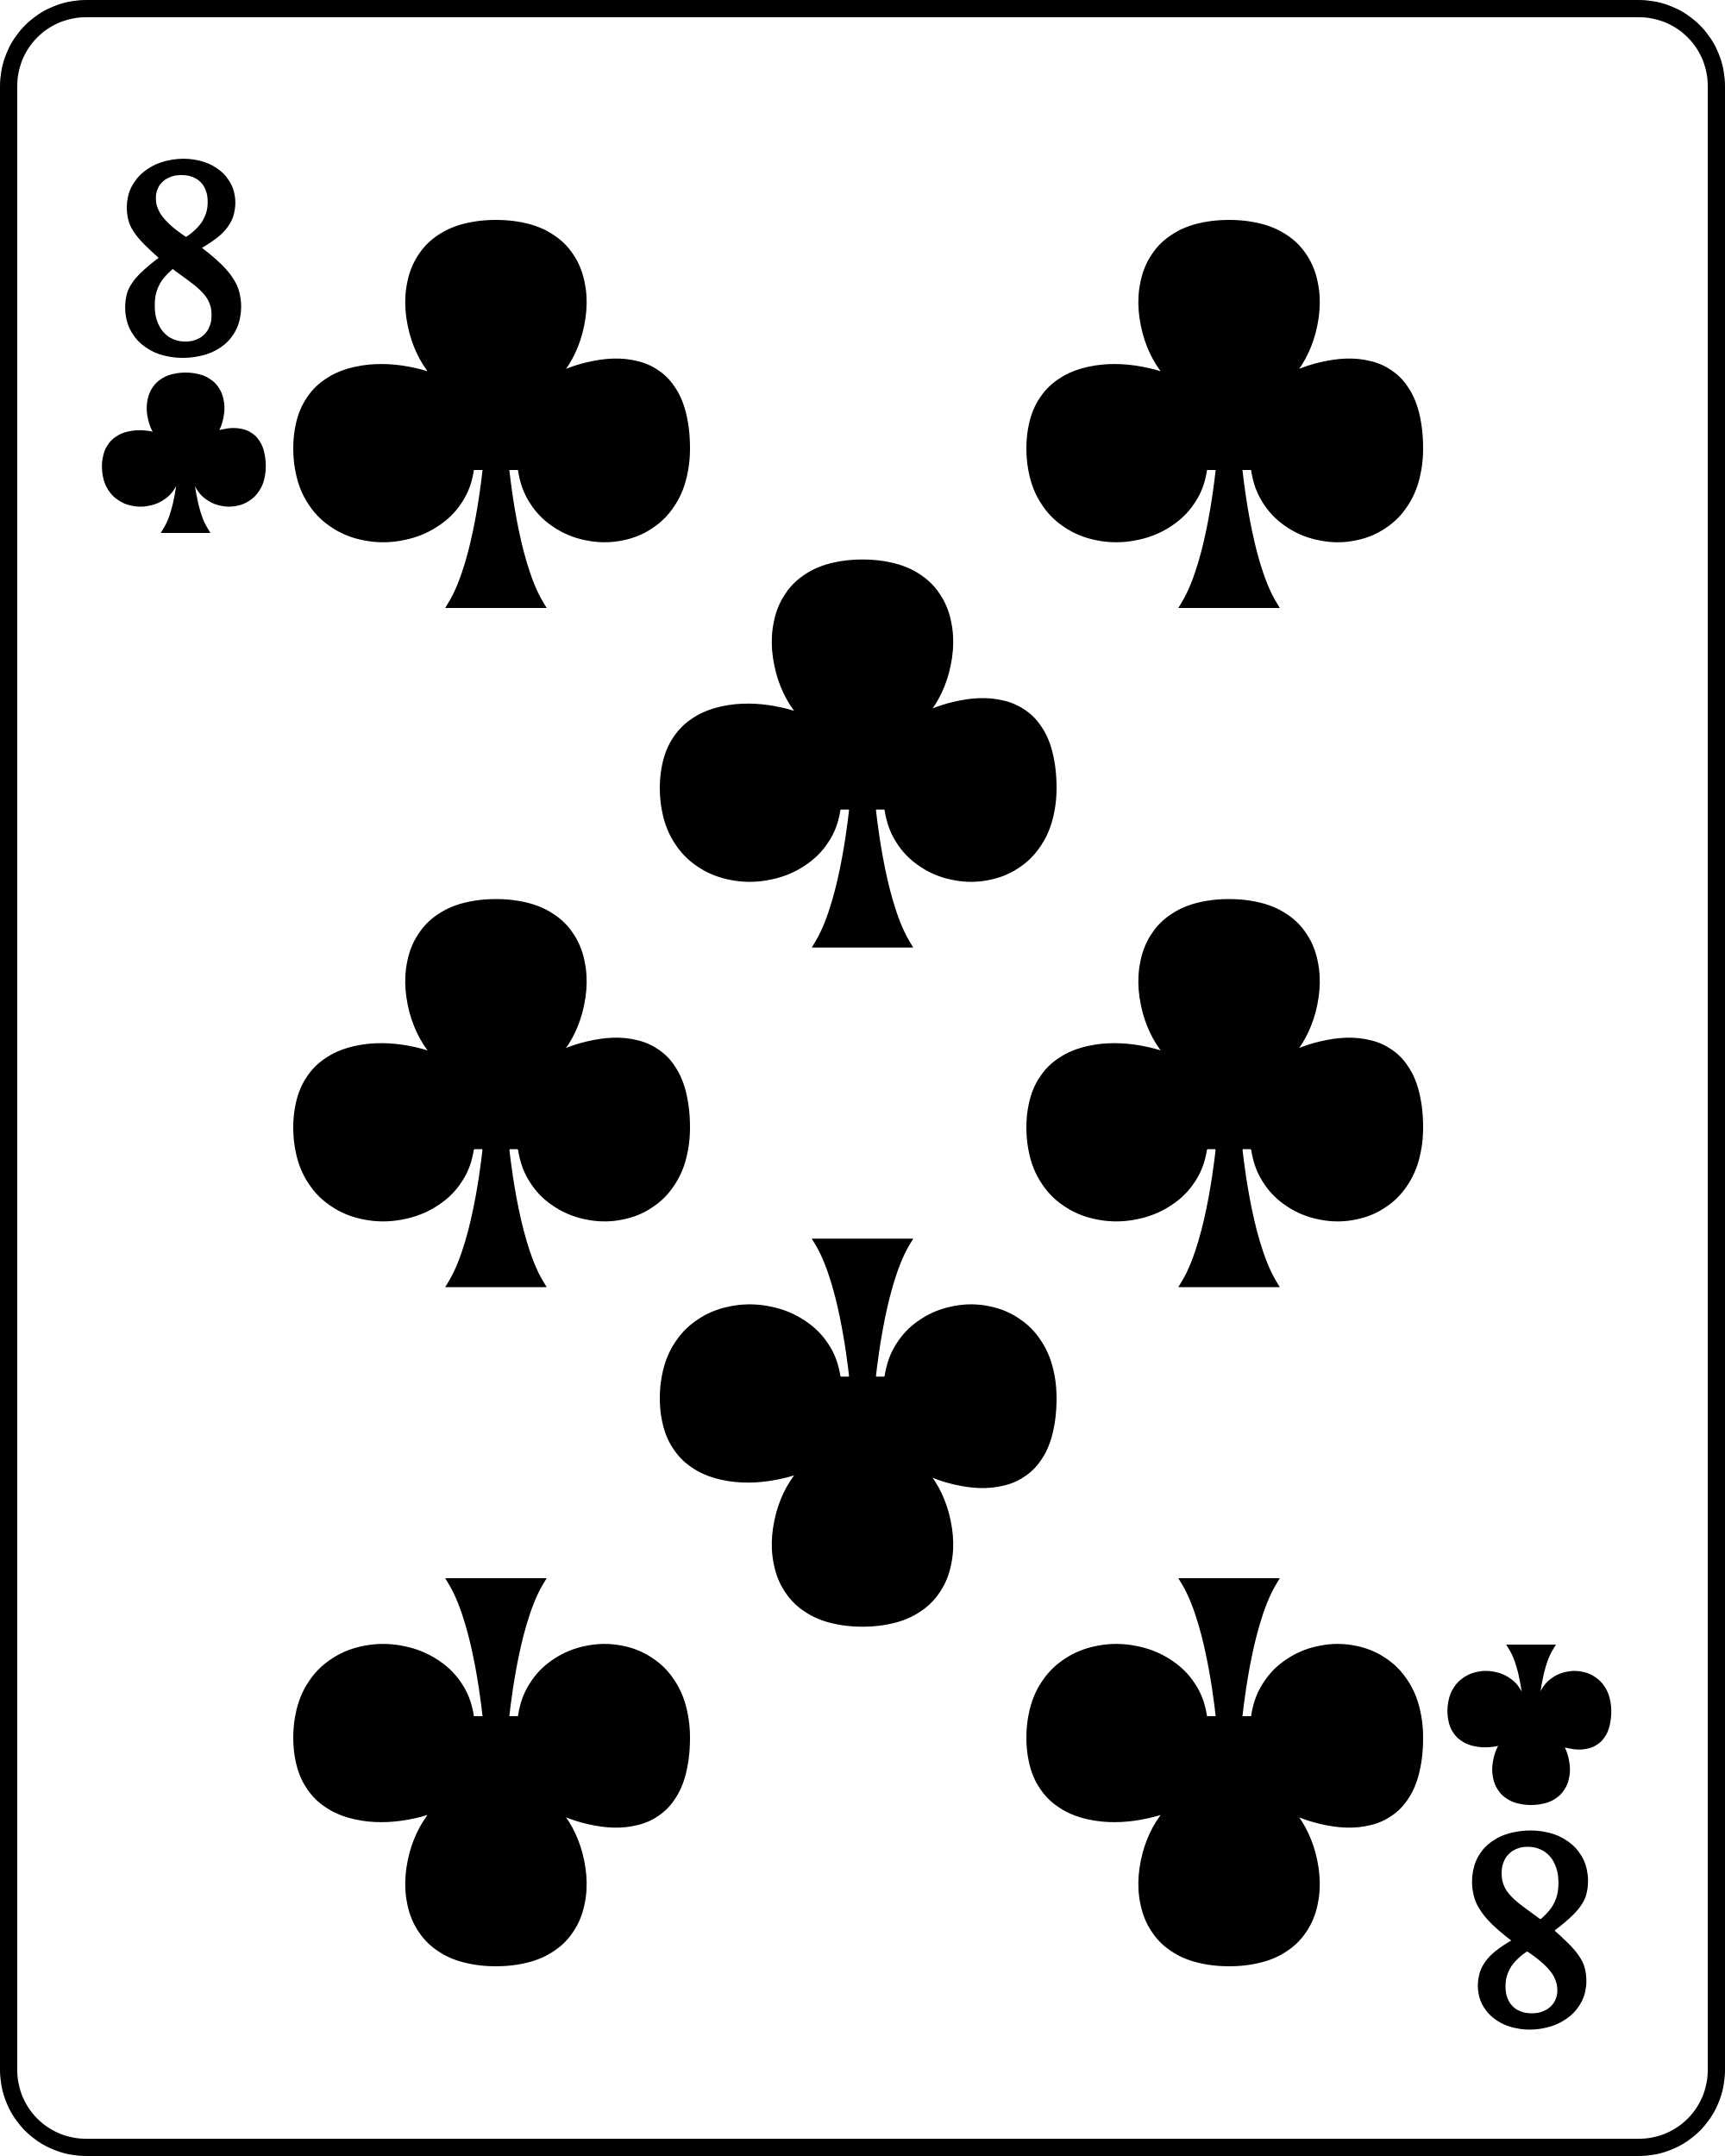 File:Playing card club 8.svg - Wikimedia Commons